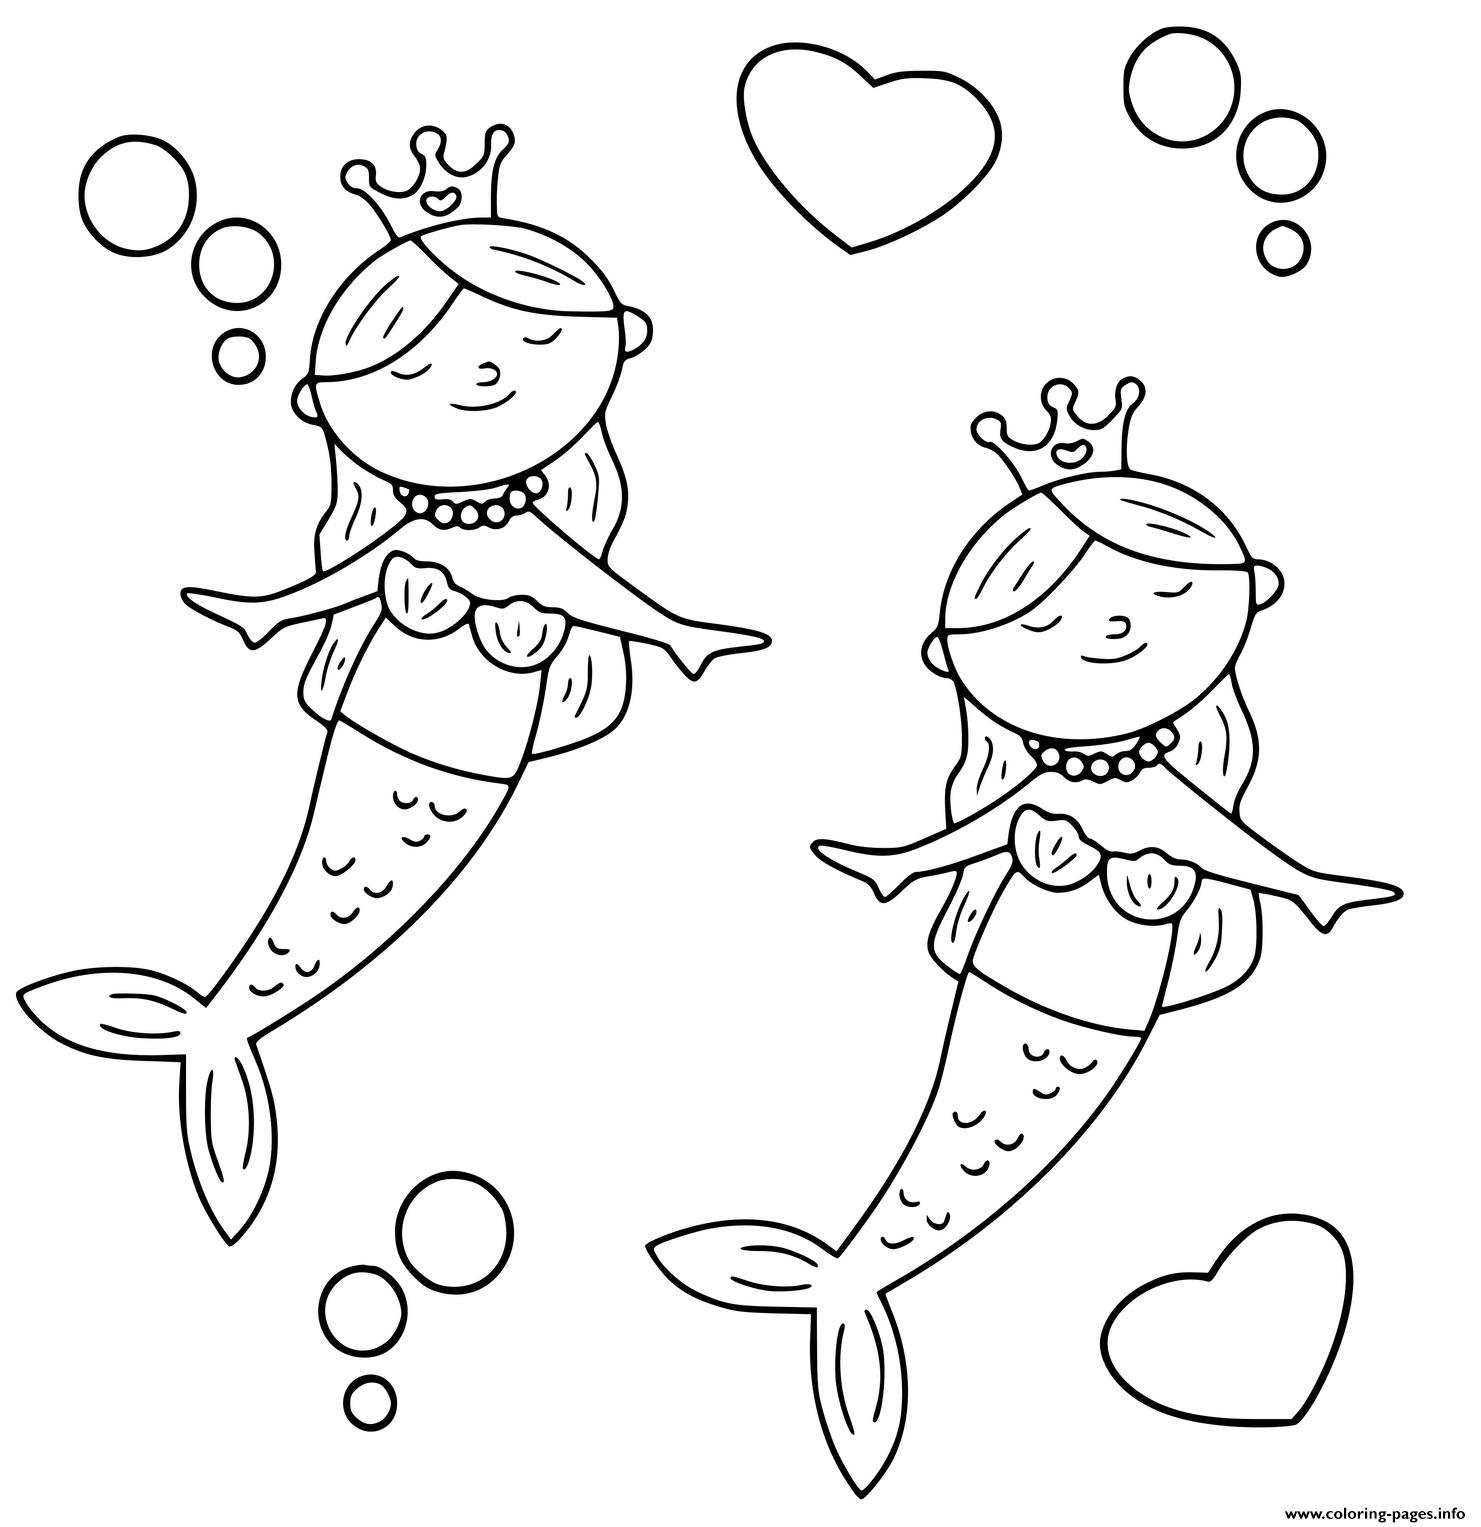 Matching Mermaids With Hearts Coloring ...coloring-pages.info